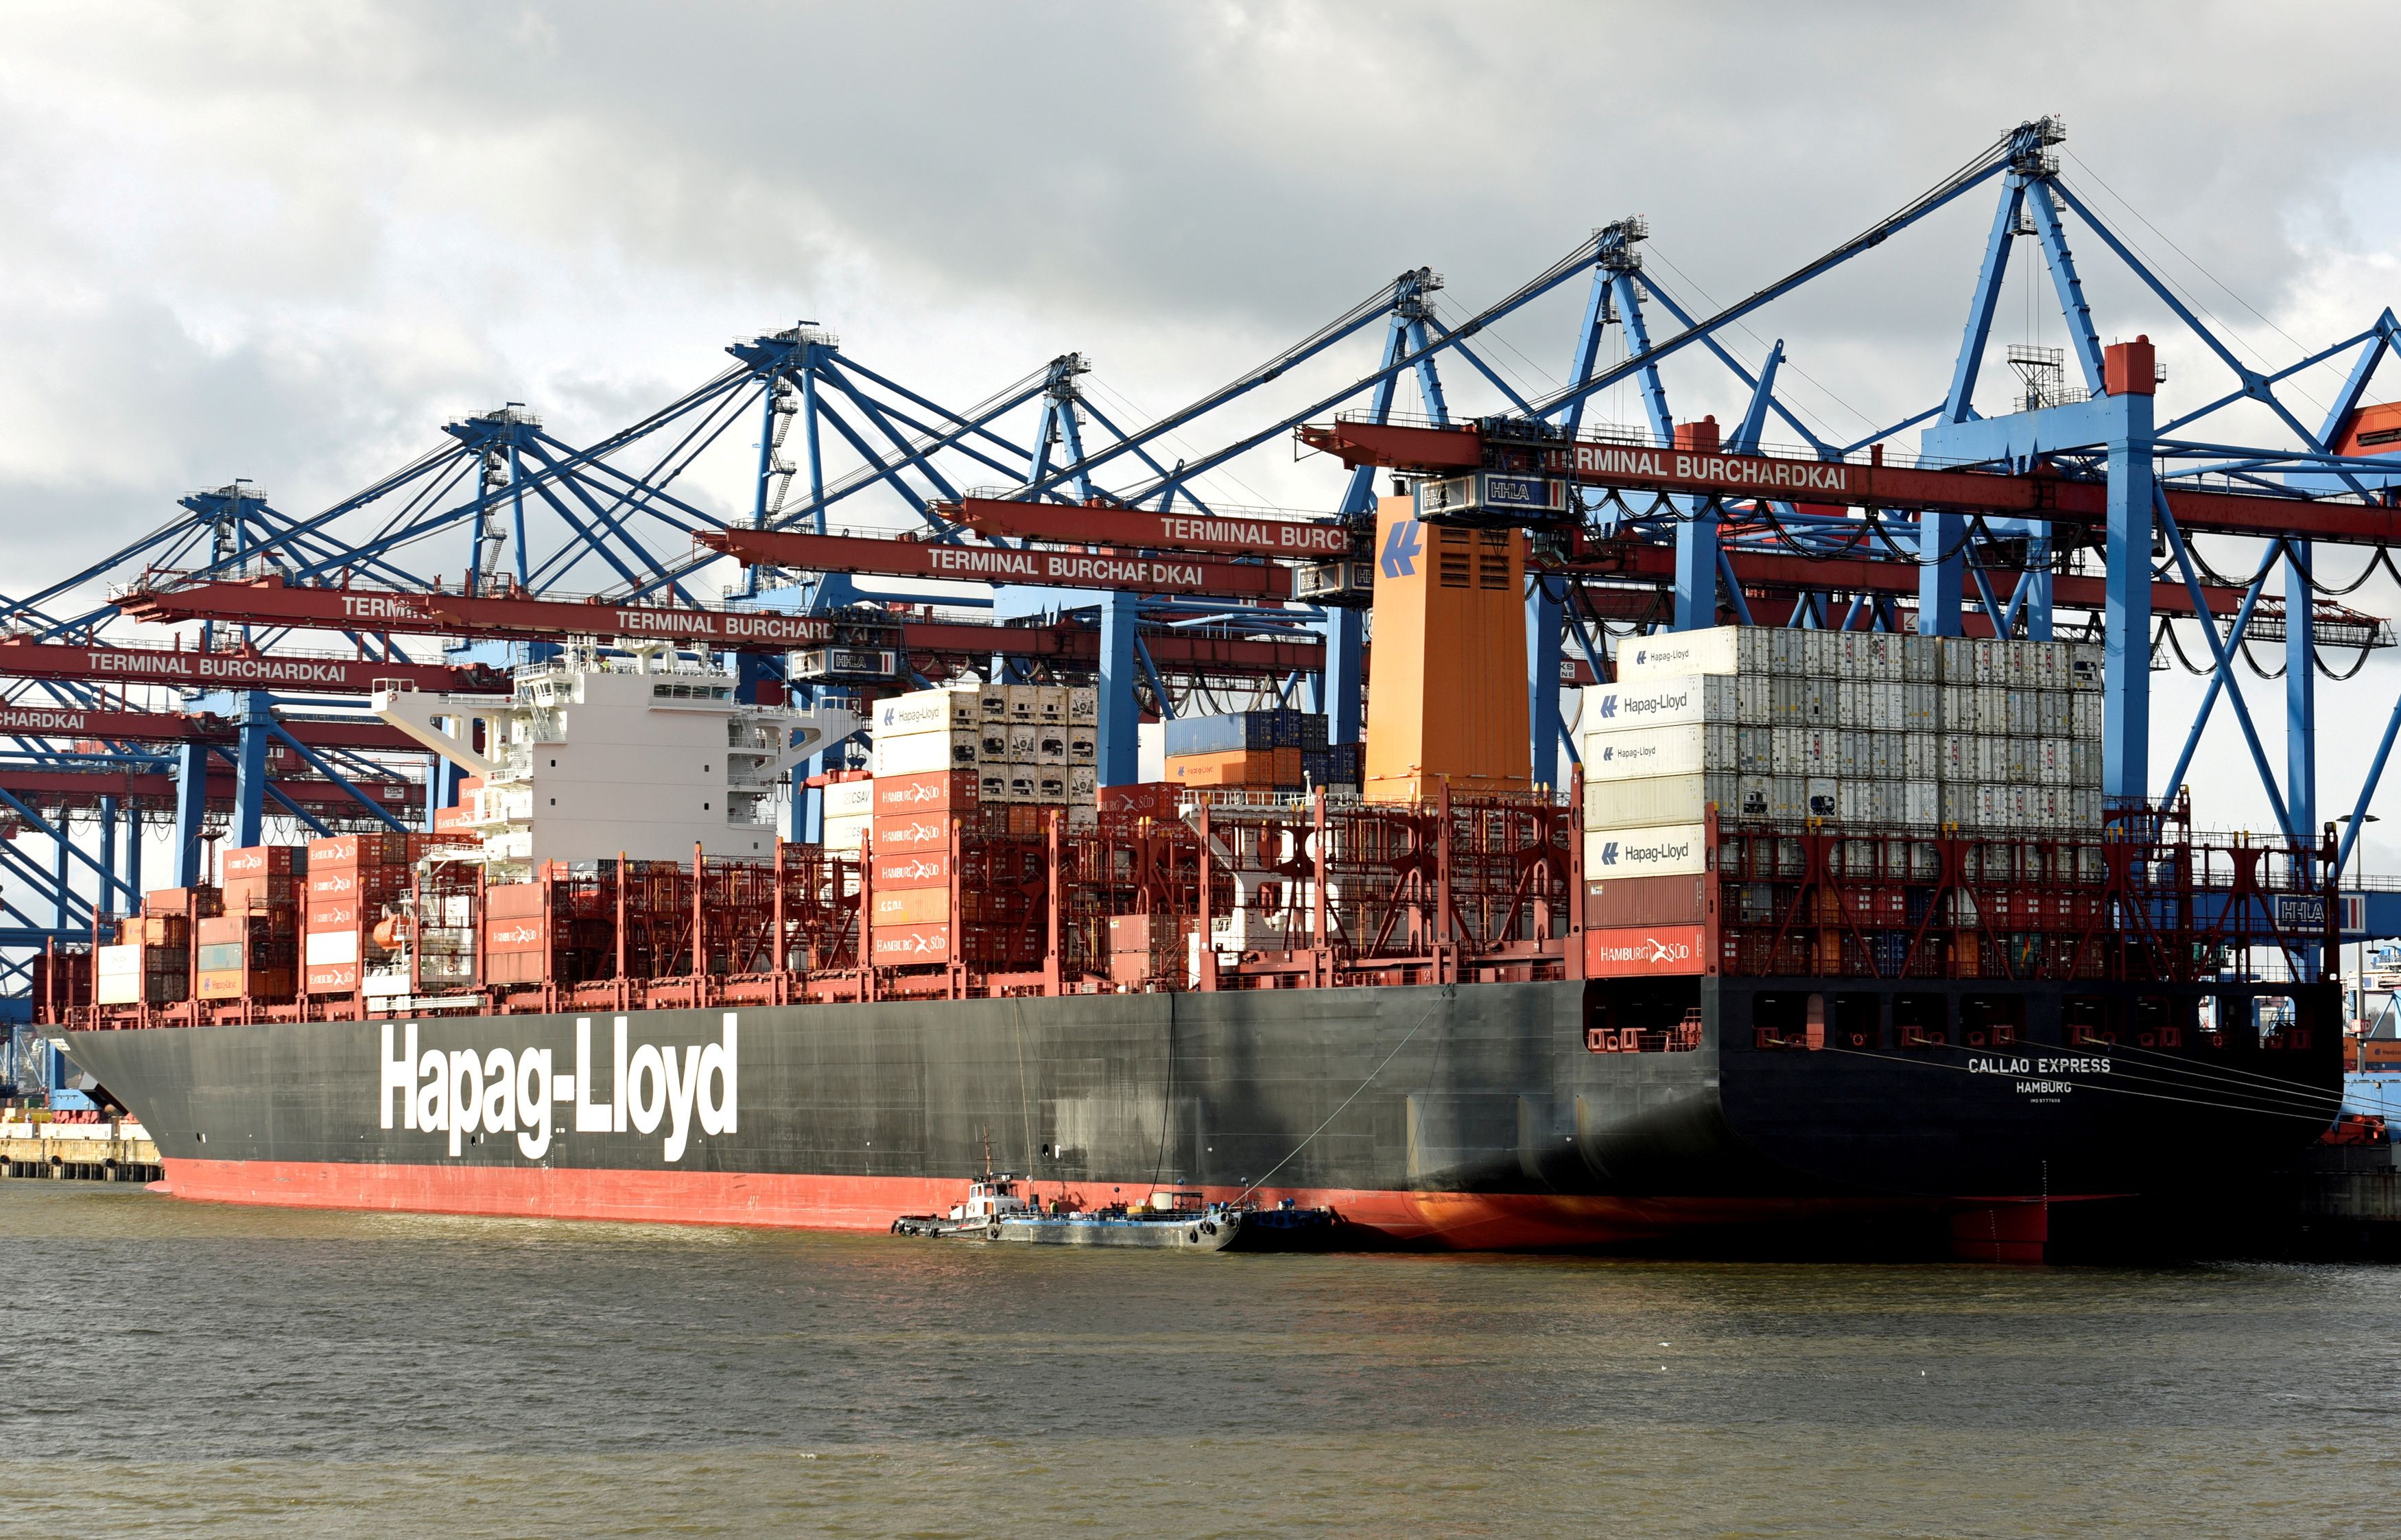 A Hapag Lloyd container ship is loaded at a shipping terminal in the harbour of Hamburg